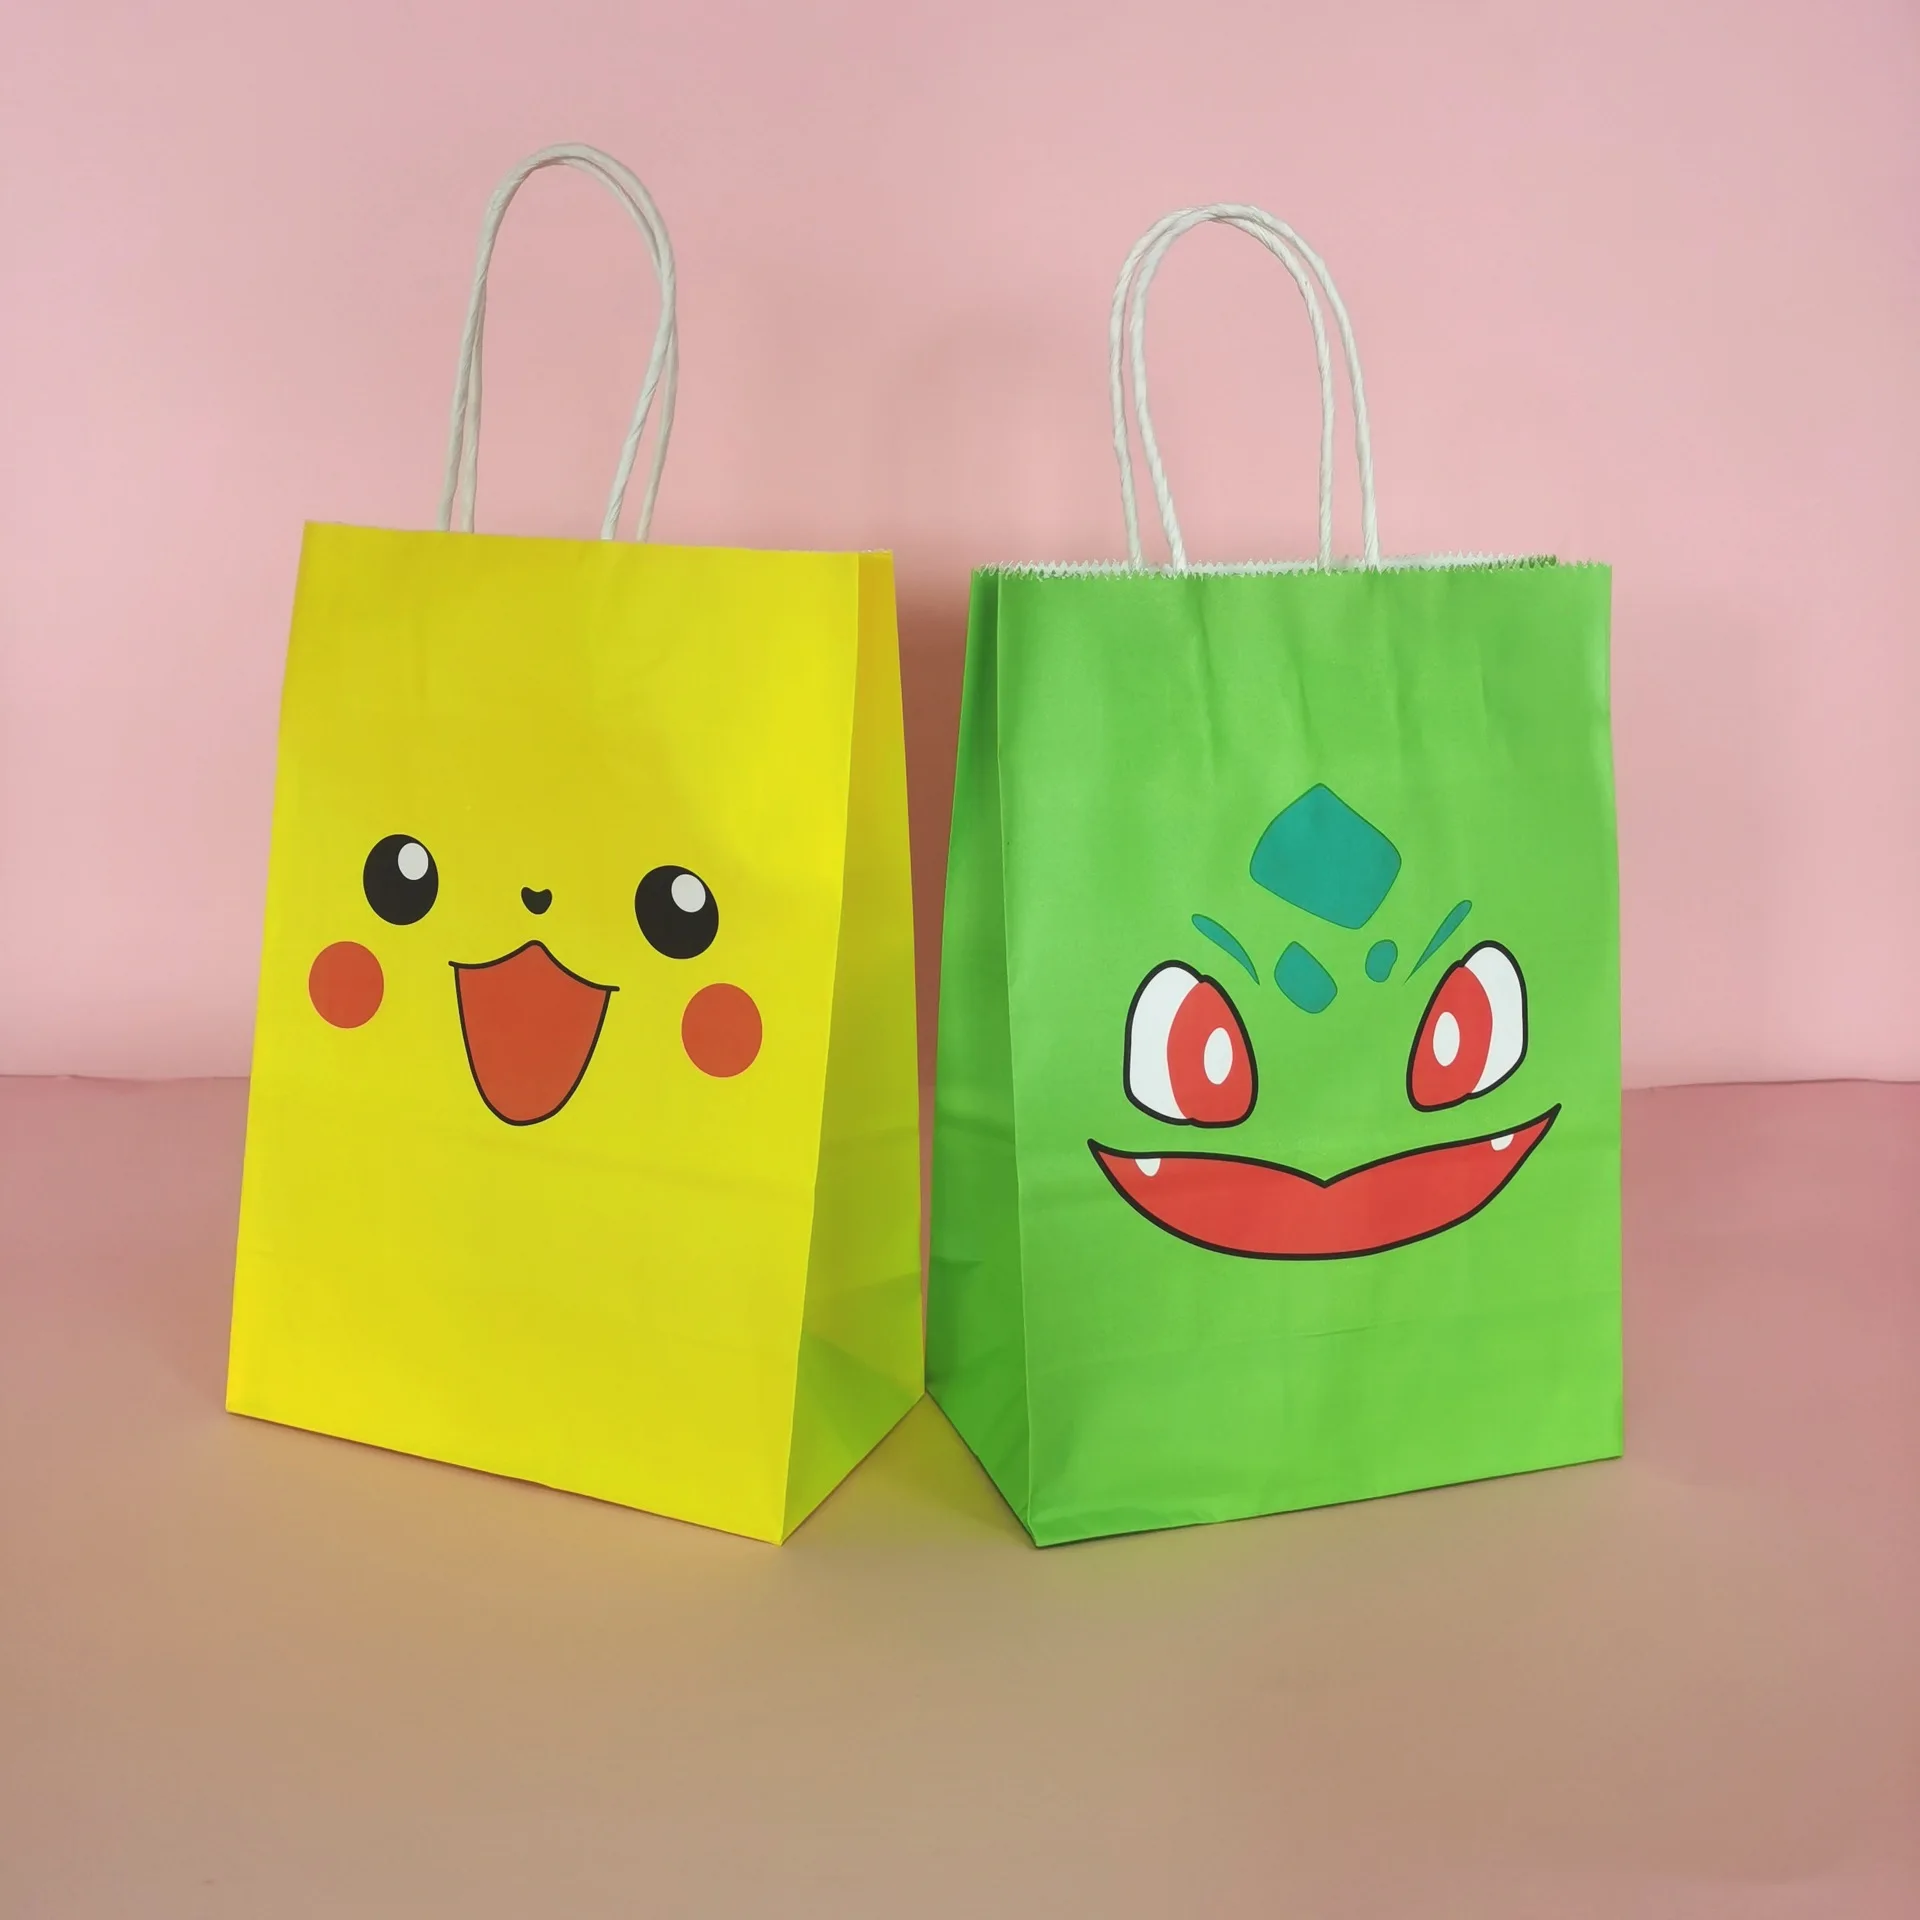 Pokemon Pikachu Paper Bag Anime action figureJenny Turtle Hand-held Gift Party Halloween Candy Birthday Gifts | Игрушки и хобби